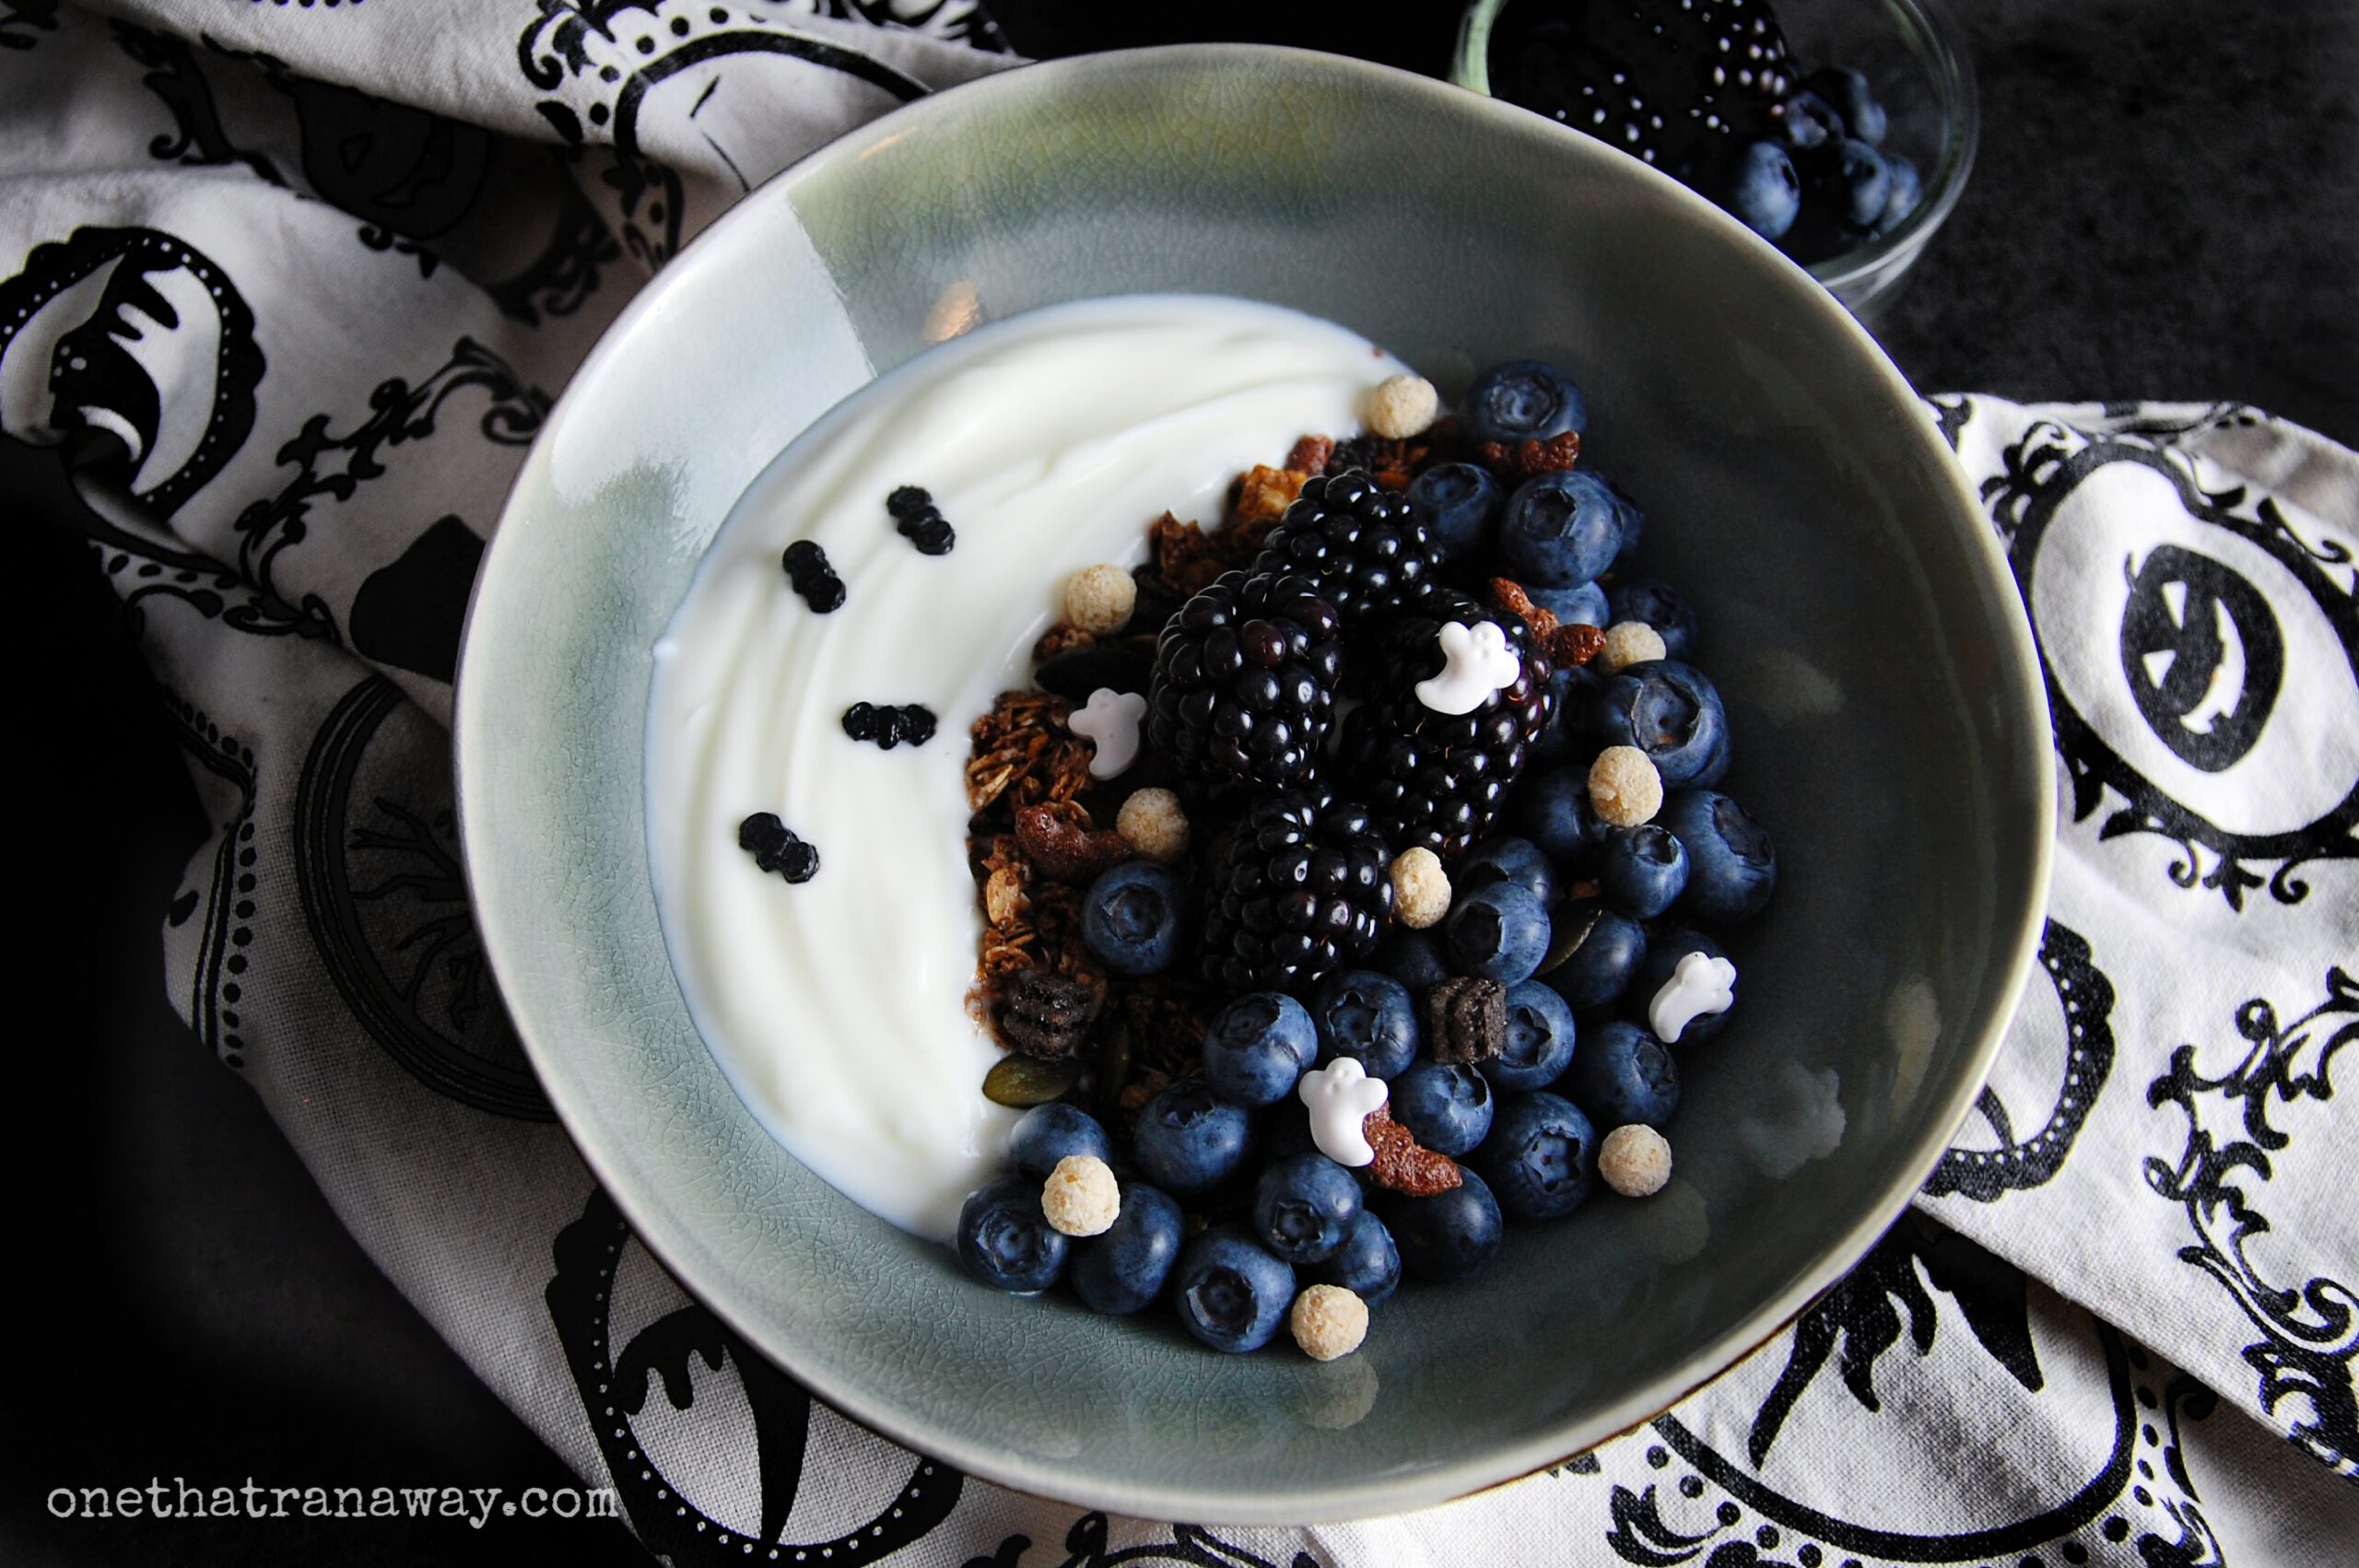 a bowl of yoghurt and cereal forming a crescent moon on top of a beige and black kitchen towel